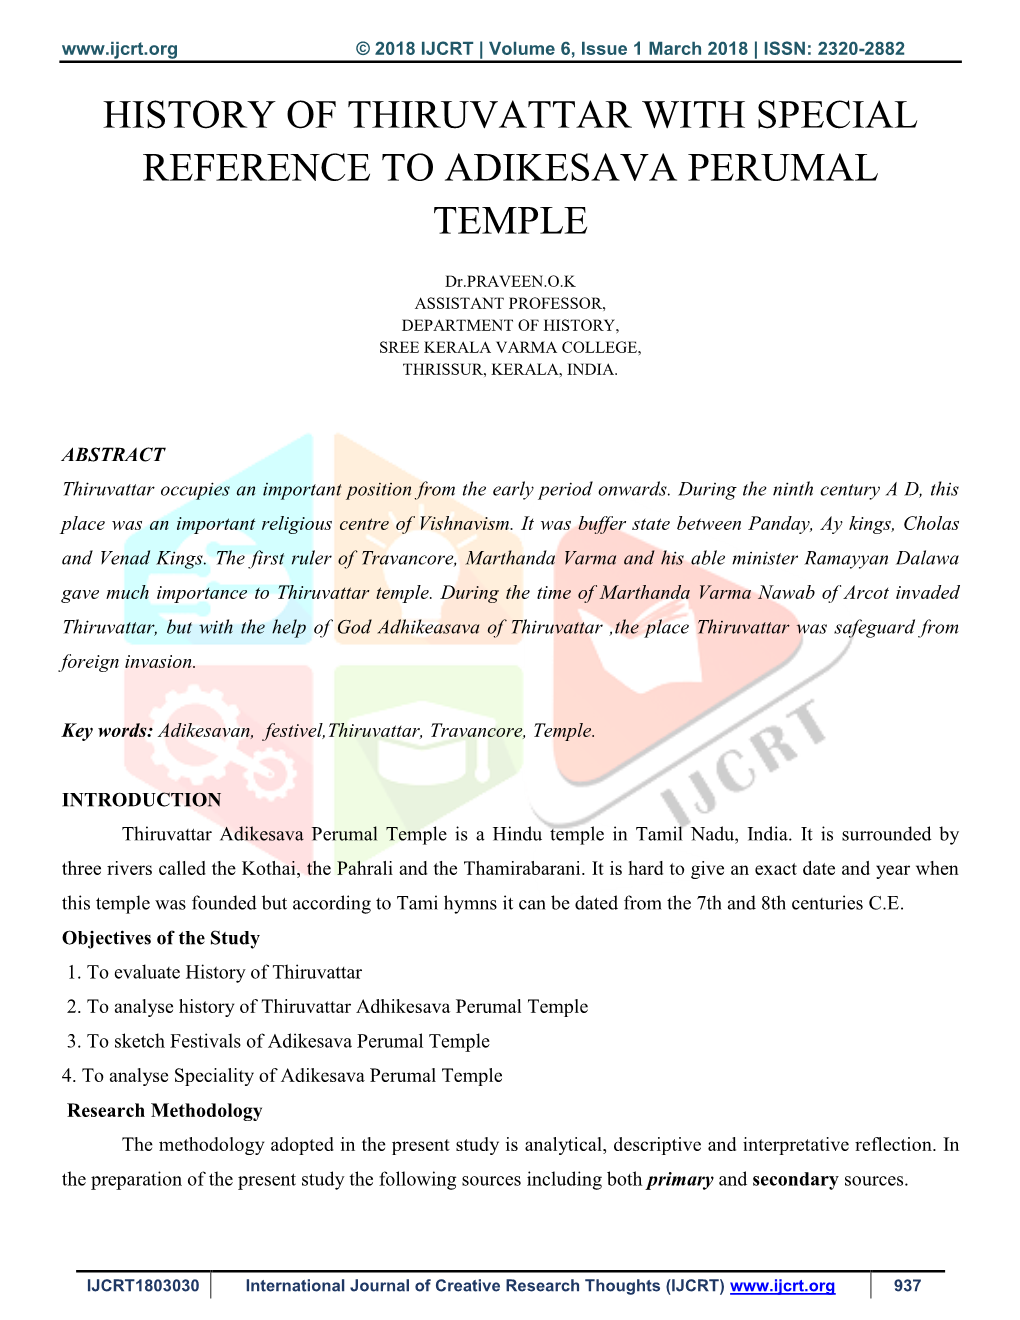 History of Thiruvattar with Special Reference to Adikesava Perumal Temple